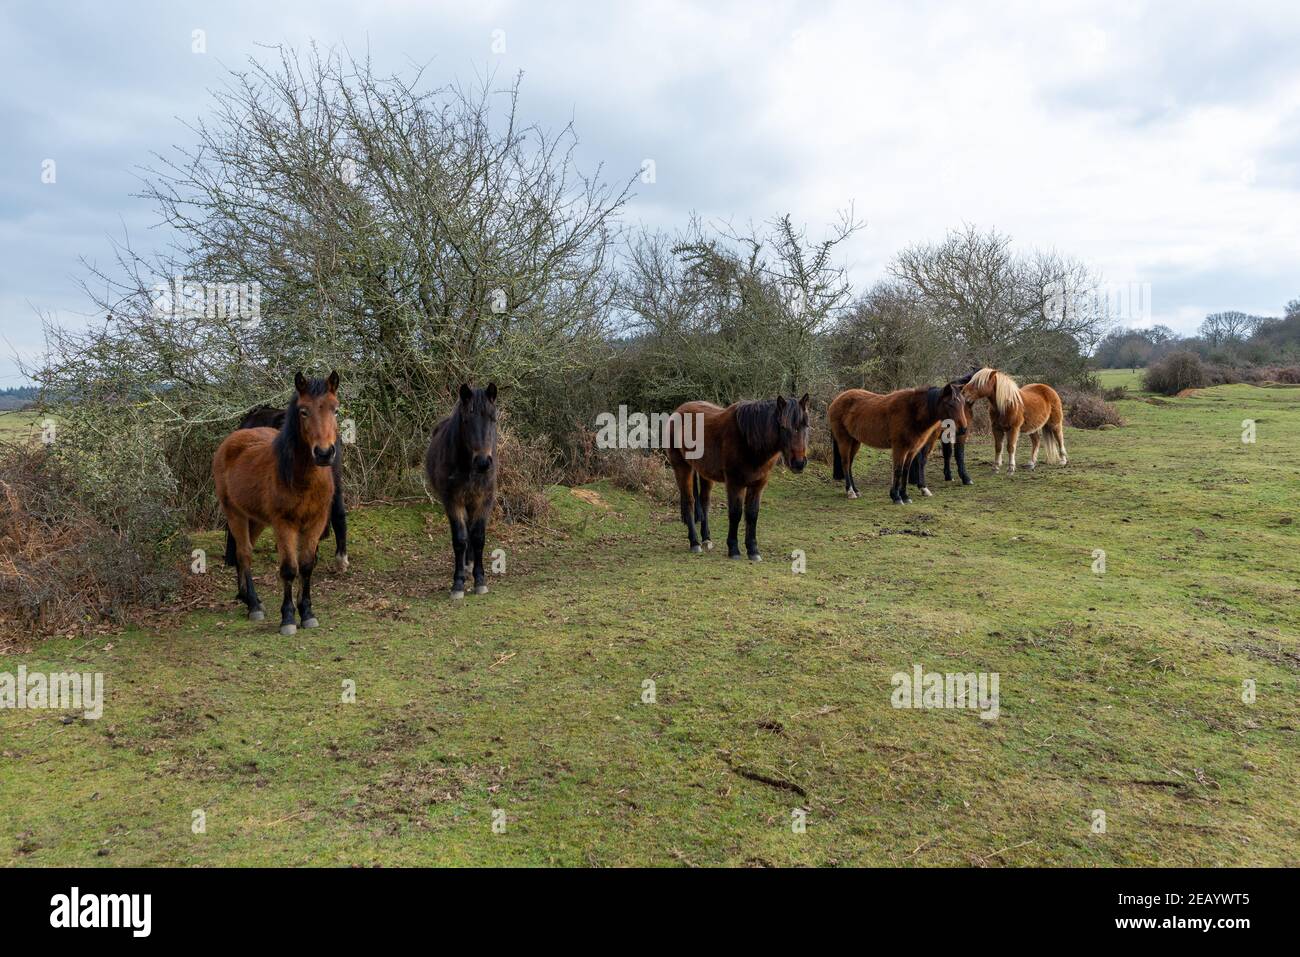 Frogham, Fordingbridge, Hampshire, UK, 11th February, 2021, Weather: After a severe overnight frost, temperatures are still at or below freezing in the middle of the day. Hardy New Forest ponies shelter behind a tall hedgerow from a bitingly cold easterly wind. Credit: Paul Biggins/Alamy Live News Stock Photo